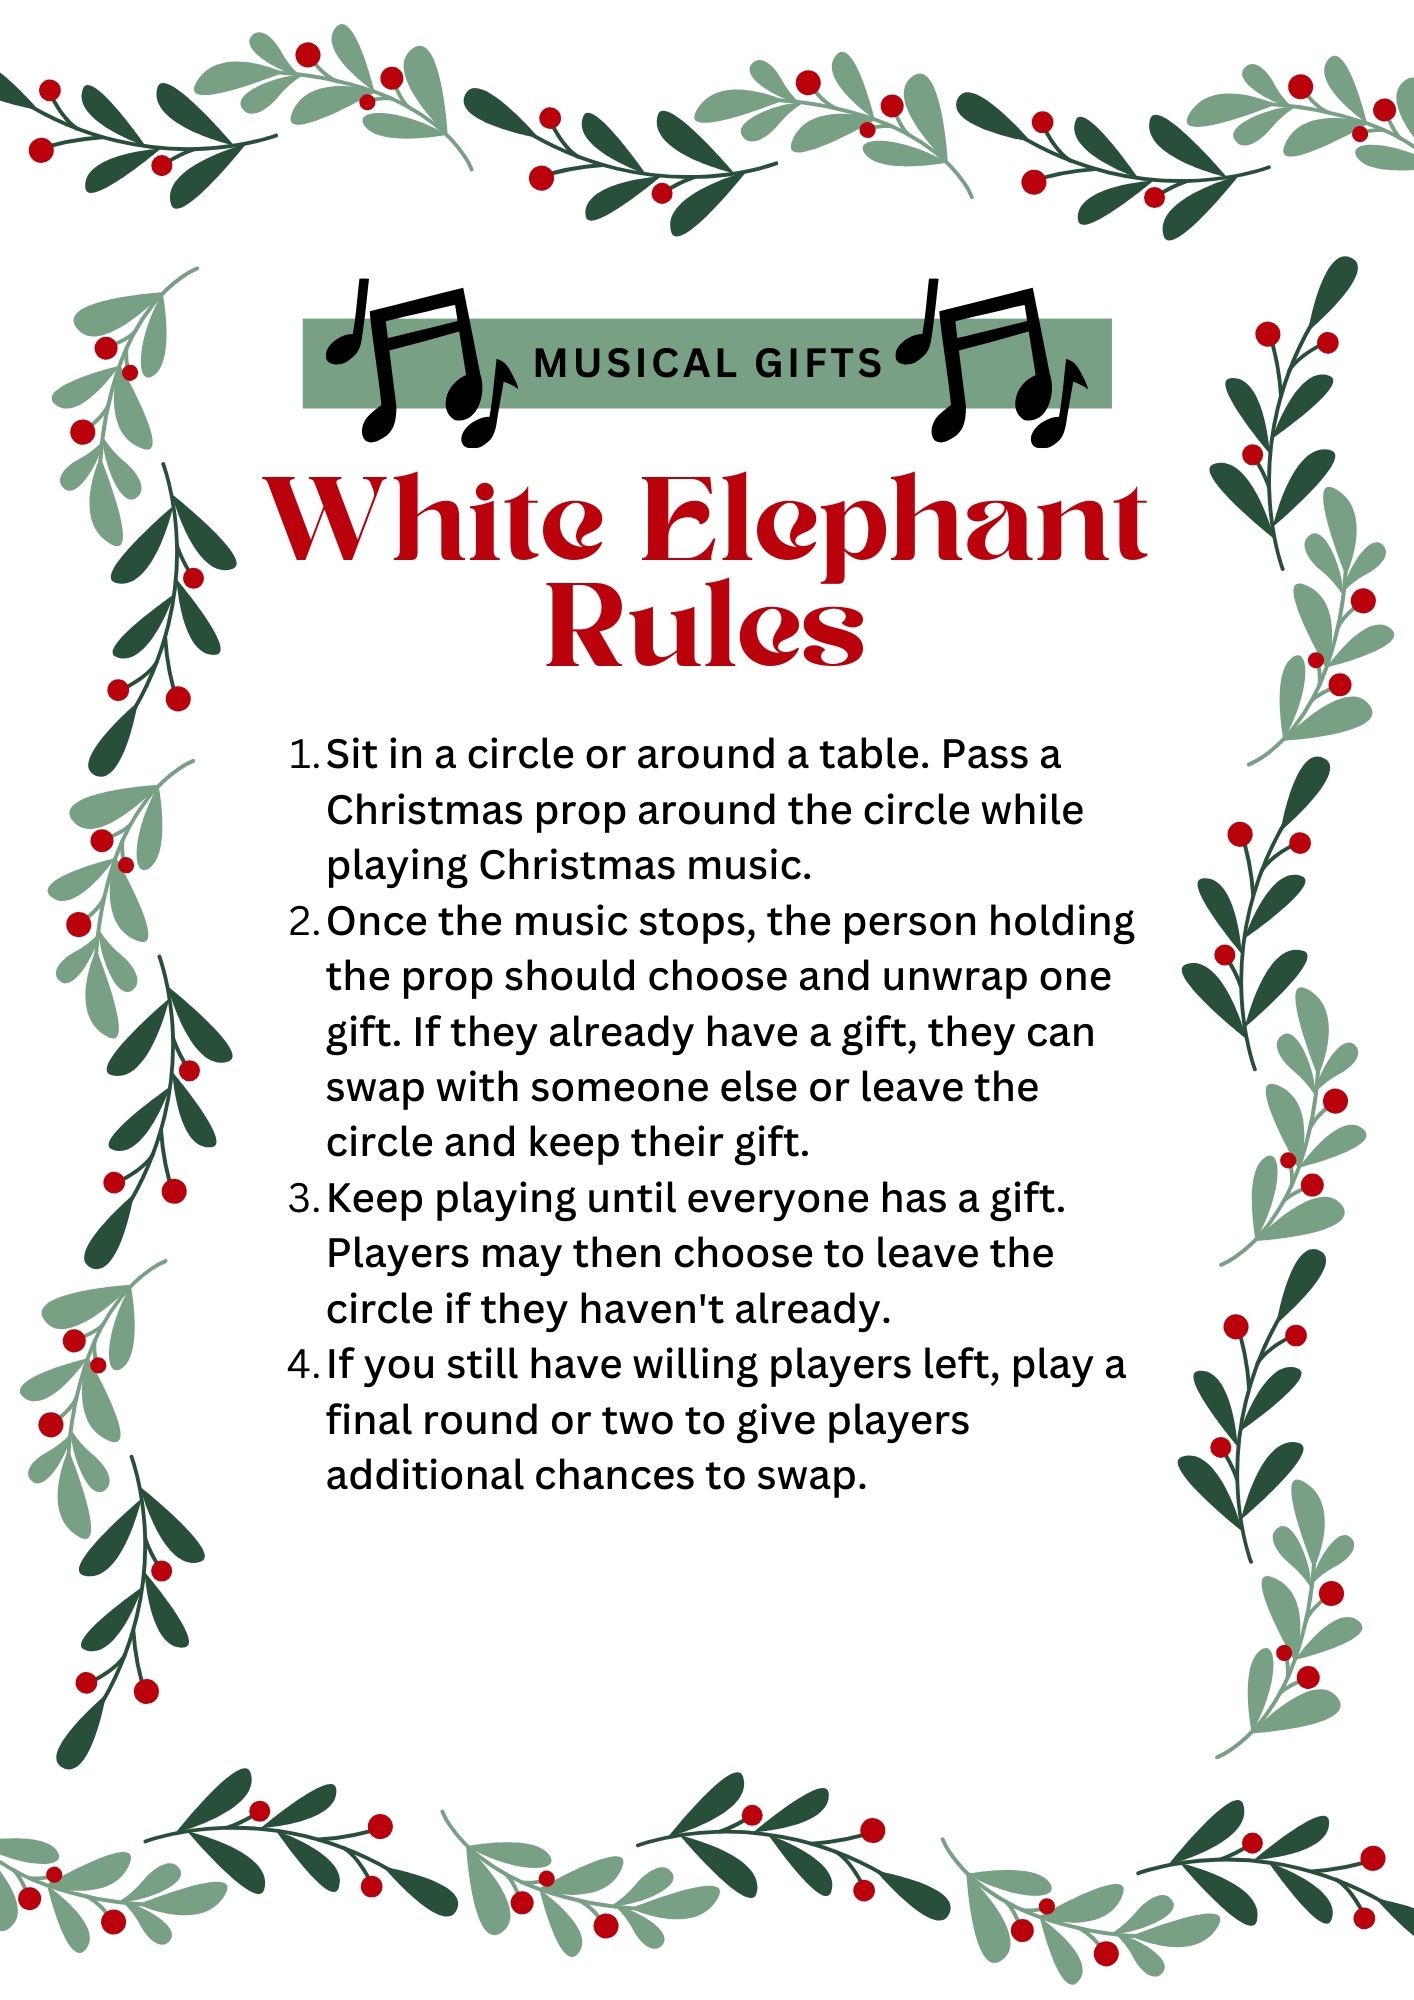 How to Throw a Rad White Elephant Party - Rules, Gift Ideas + a